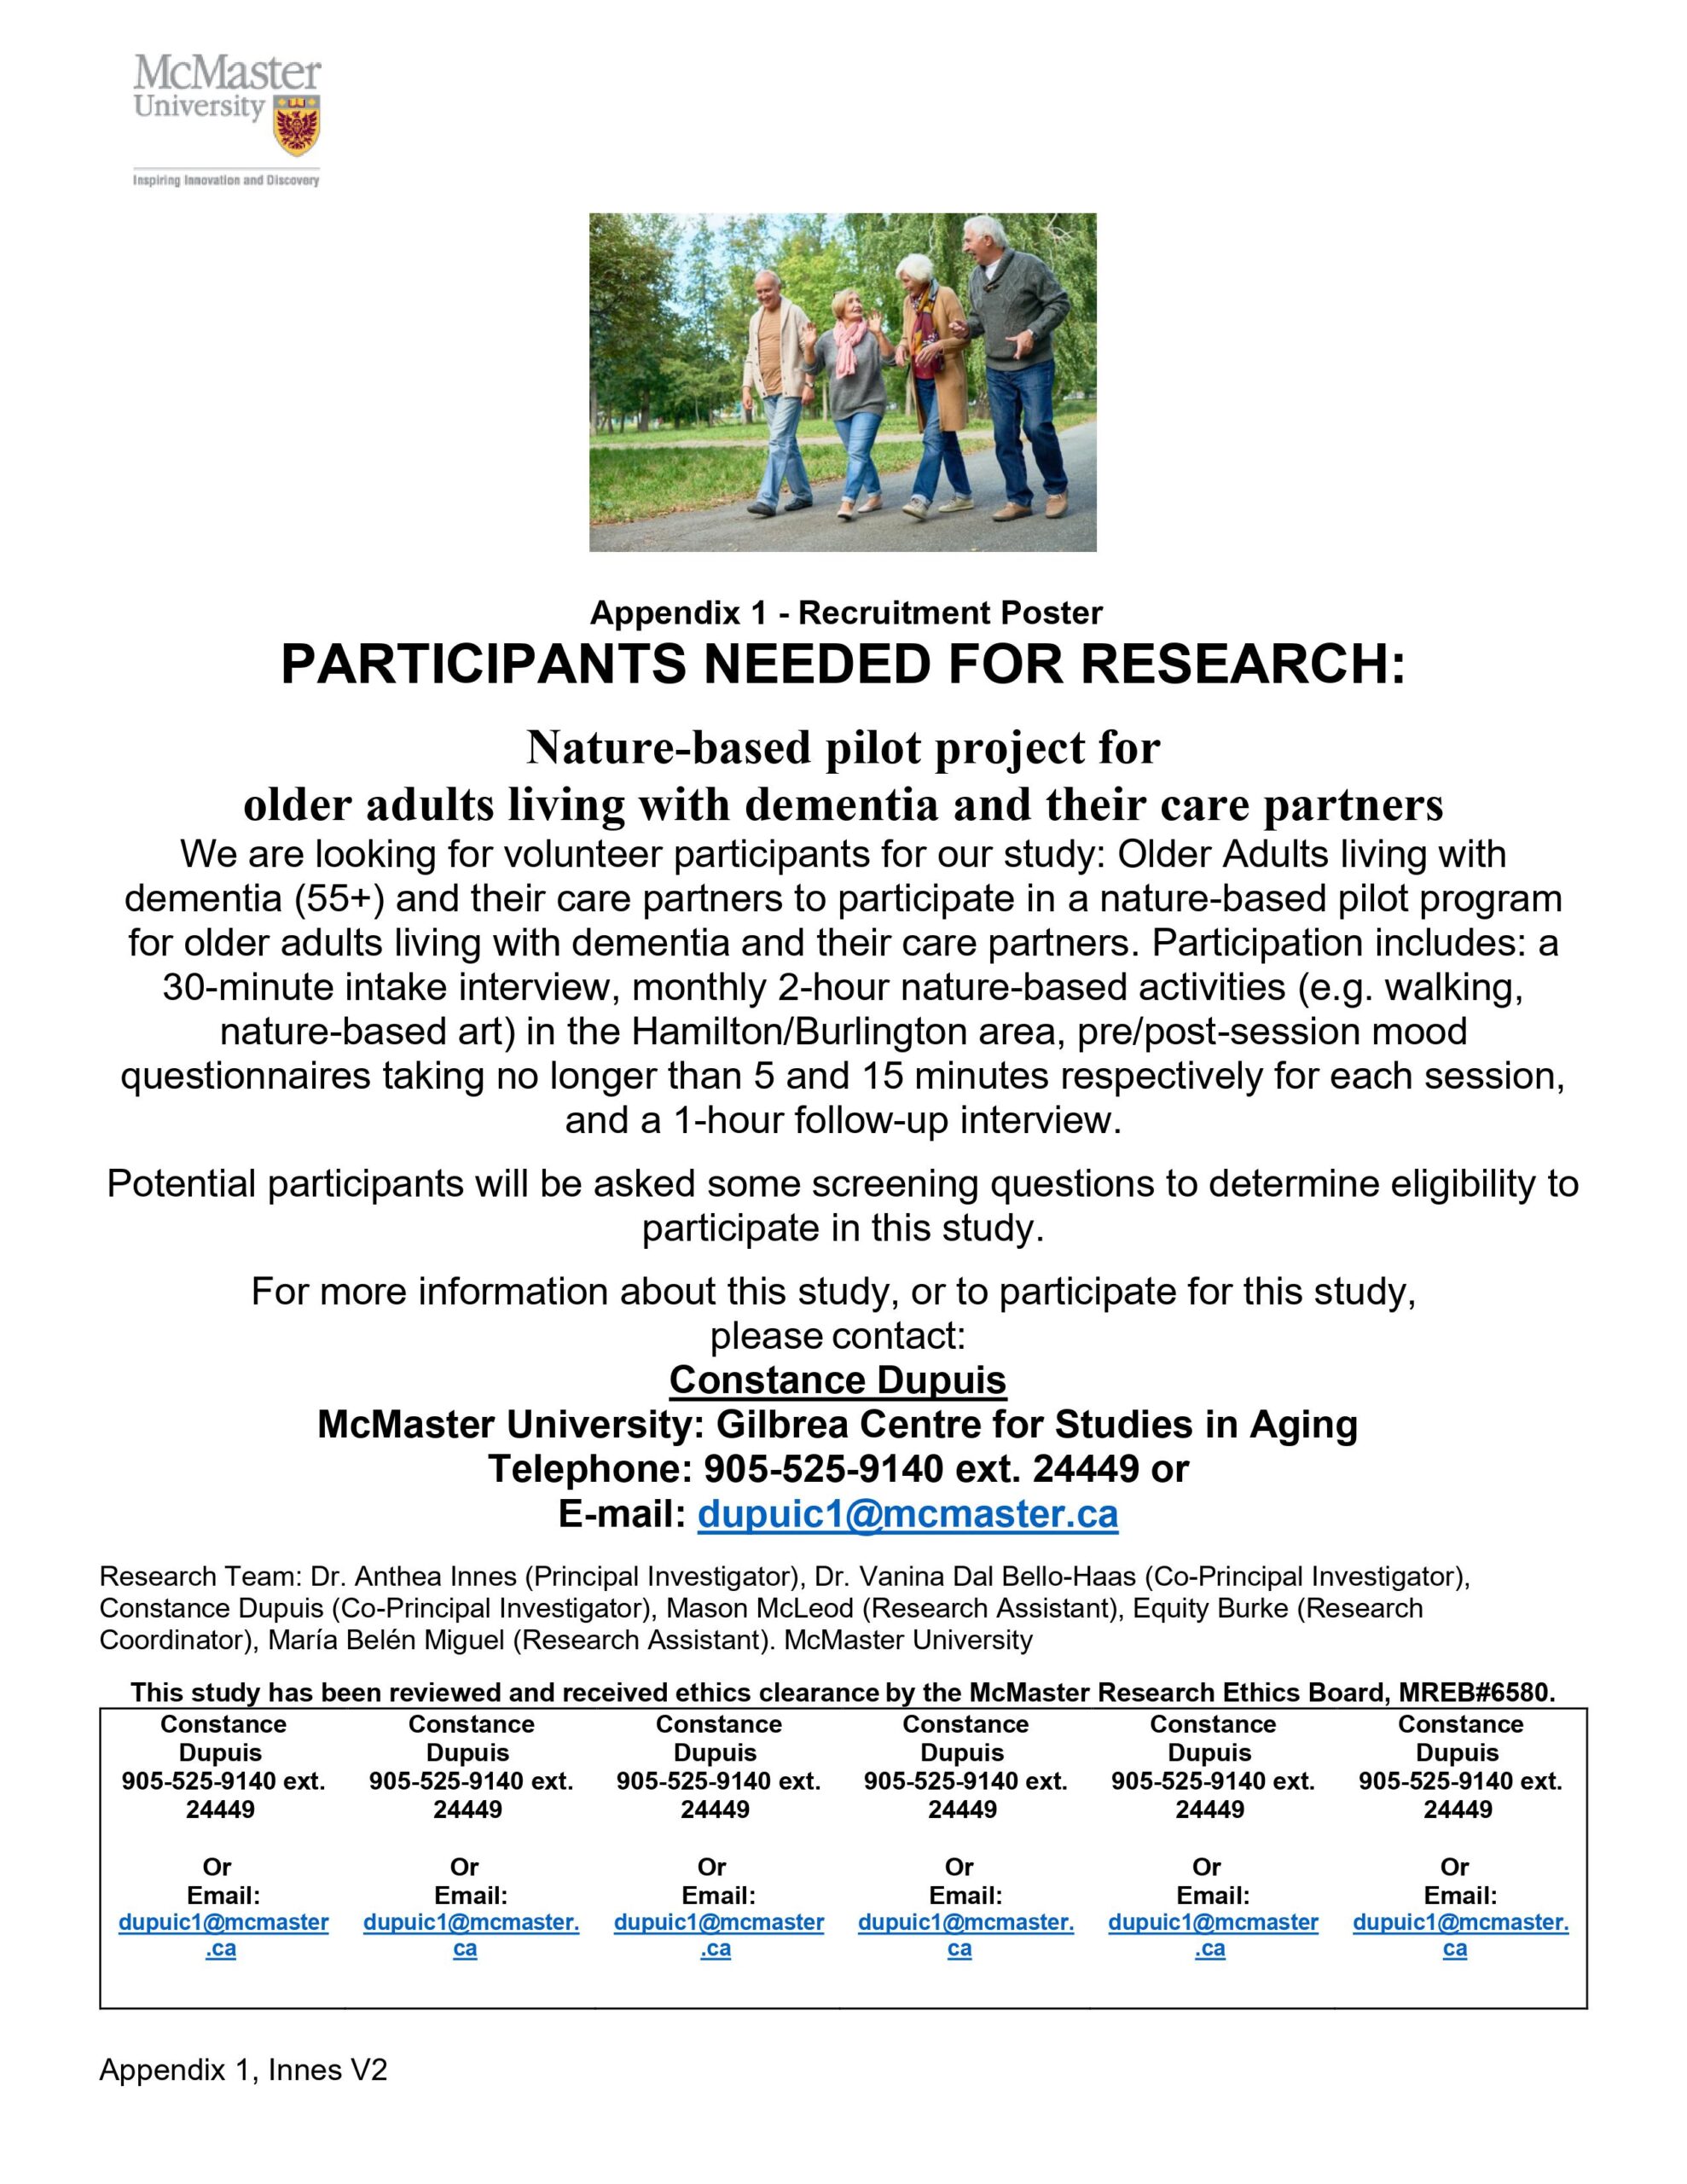 Nature-based-dementia-project-Recruitment-Poster